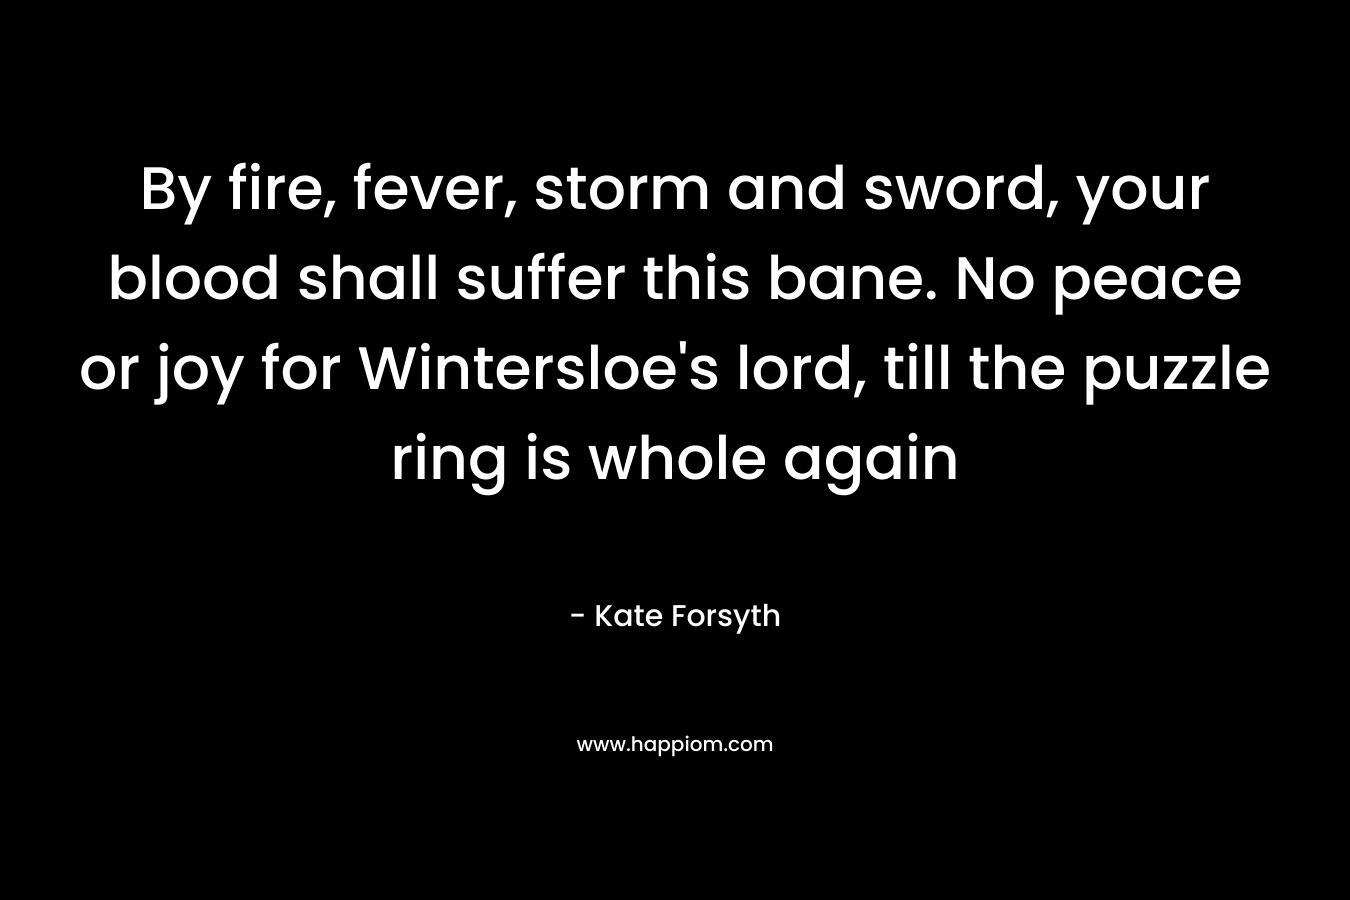 By fire, fever, storm and sword, your blood shall suffer this bane. No peace or joy for Wintersloe’s lord, till the puzzle ring is whole again – Kate Forsyth